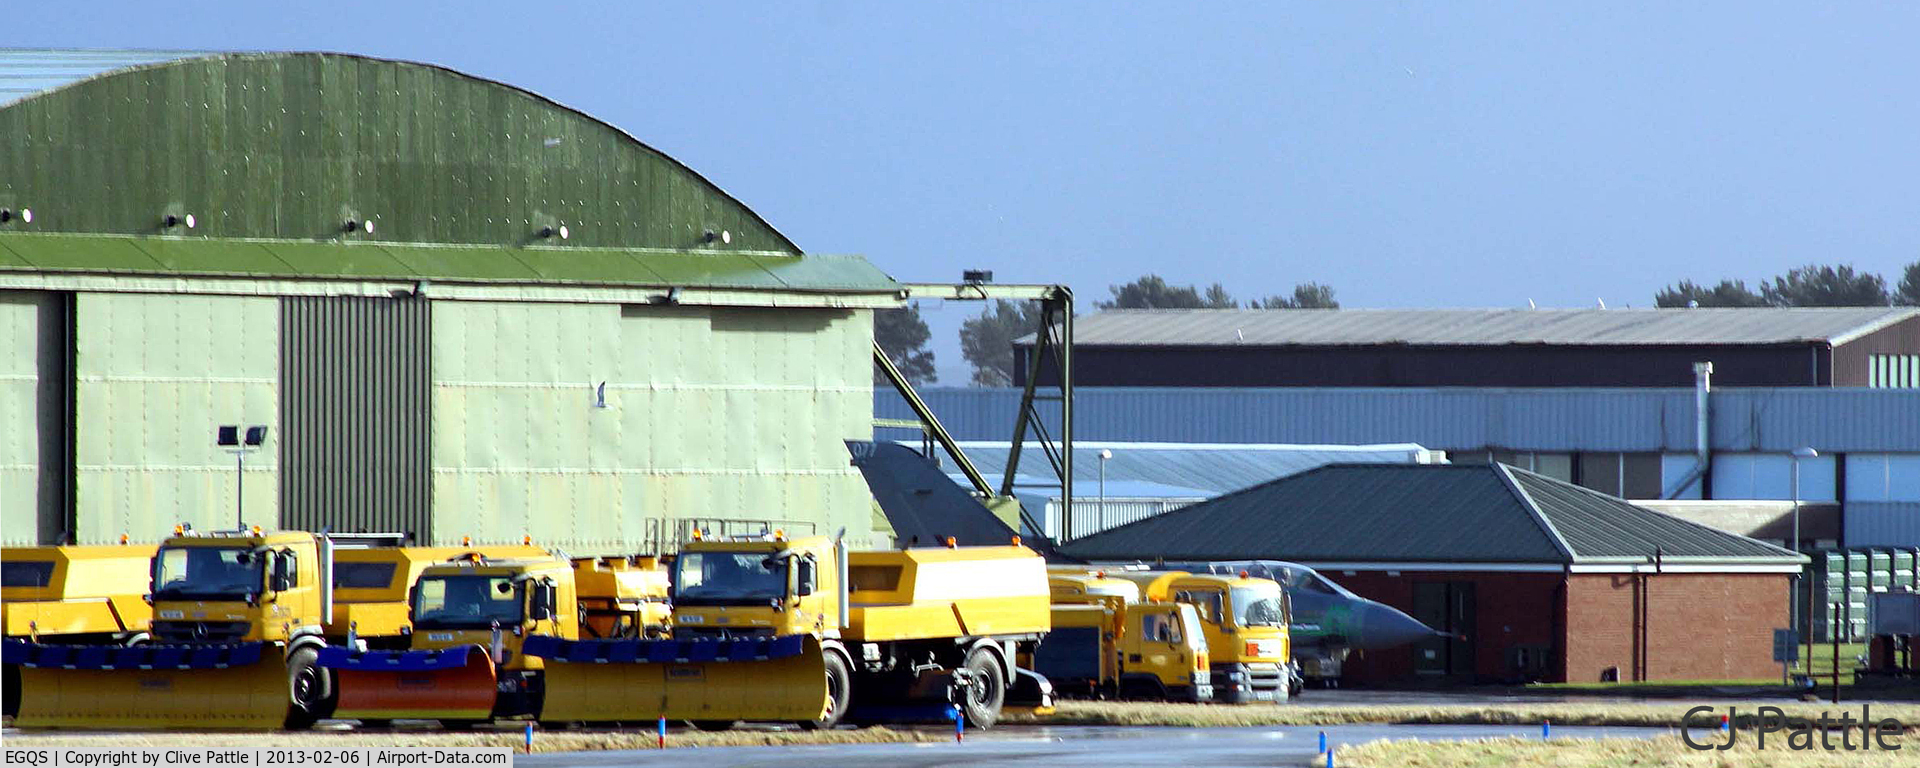 RAF Lossiemouth Airport, Lossiemouth, Scotland United Kingdom (EGQS) - Airfield Support vehicles in ready for winter action at RAF Lossiemouth